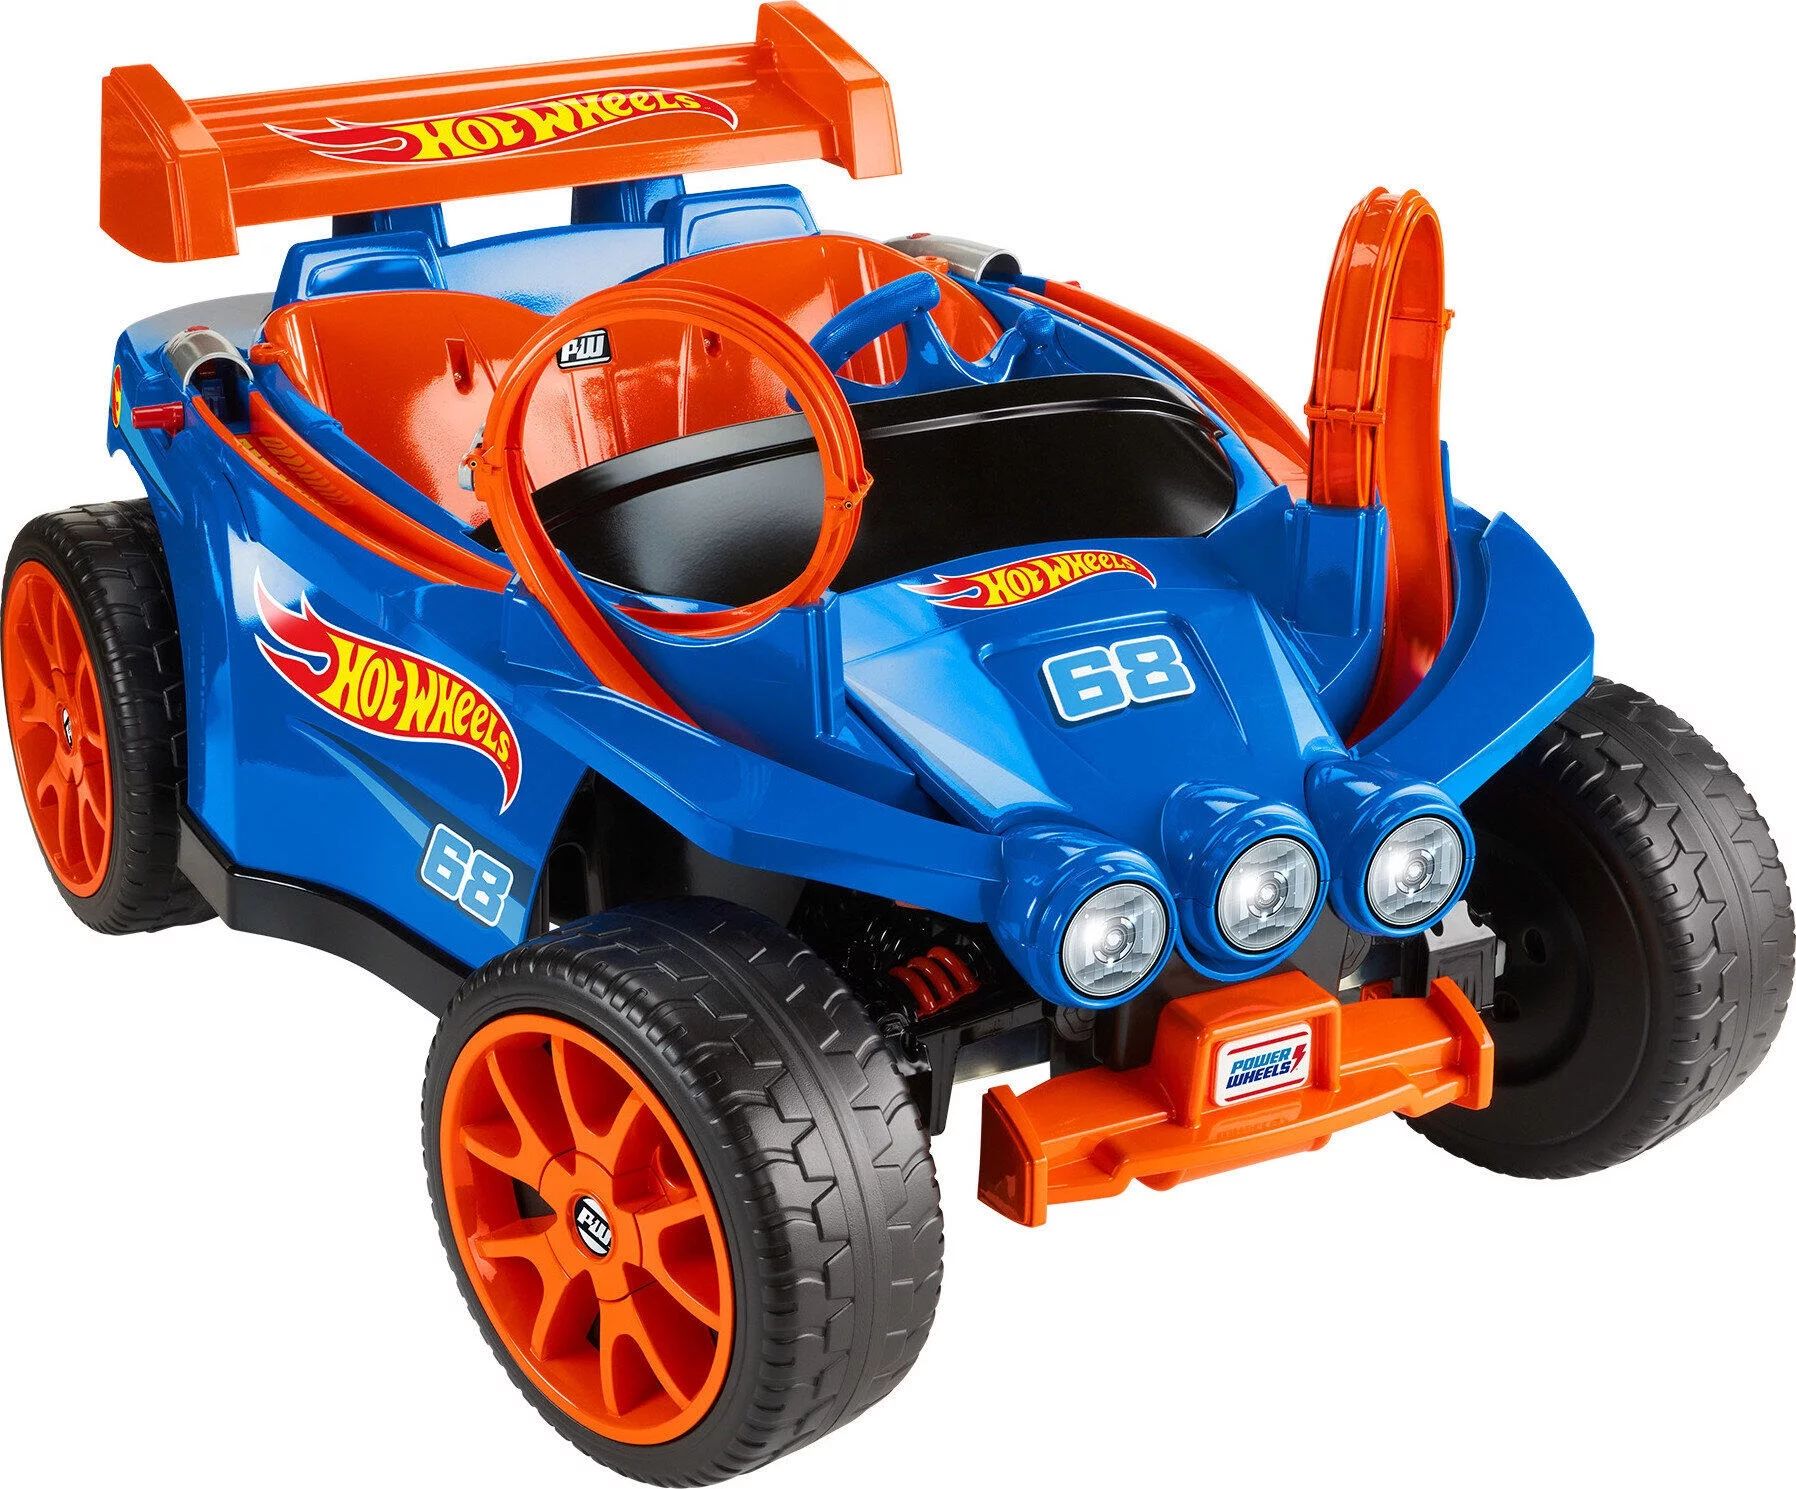 12V Power Wheels Hot Wheels Racer Battery-Powered Ride-On and Vehicle Playset with 5 Toy Cars | Walmart (US)